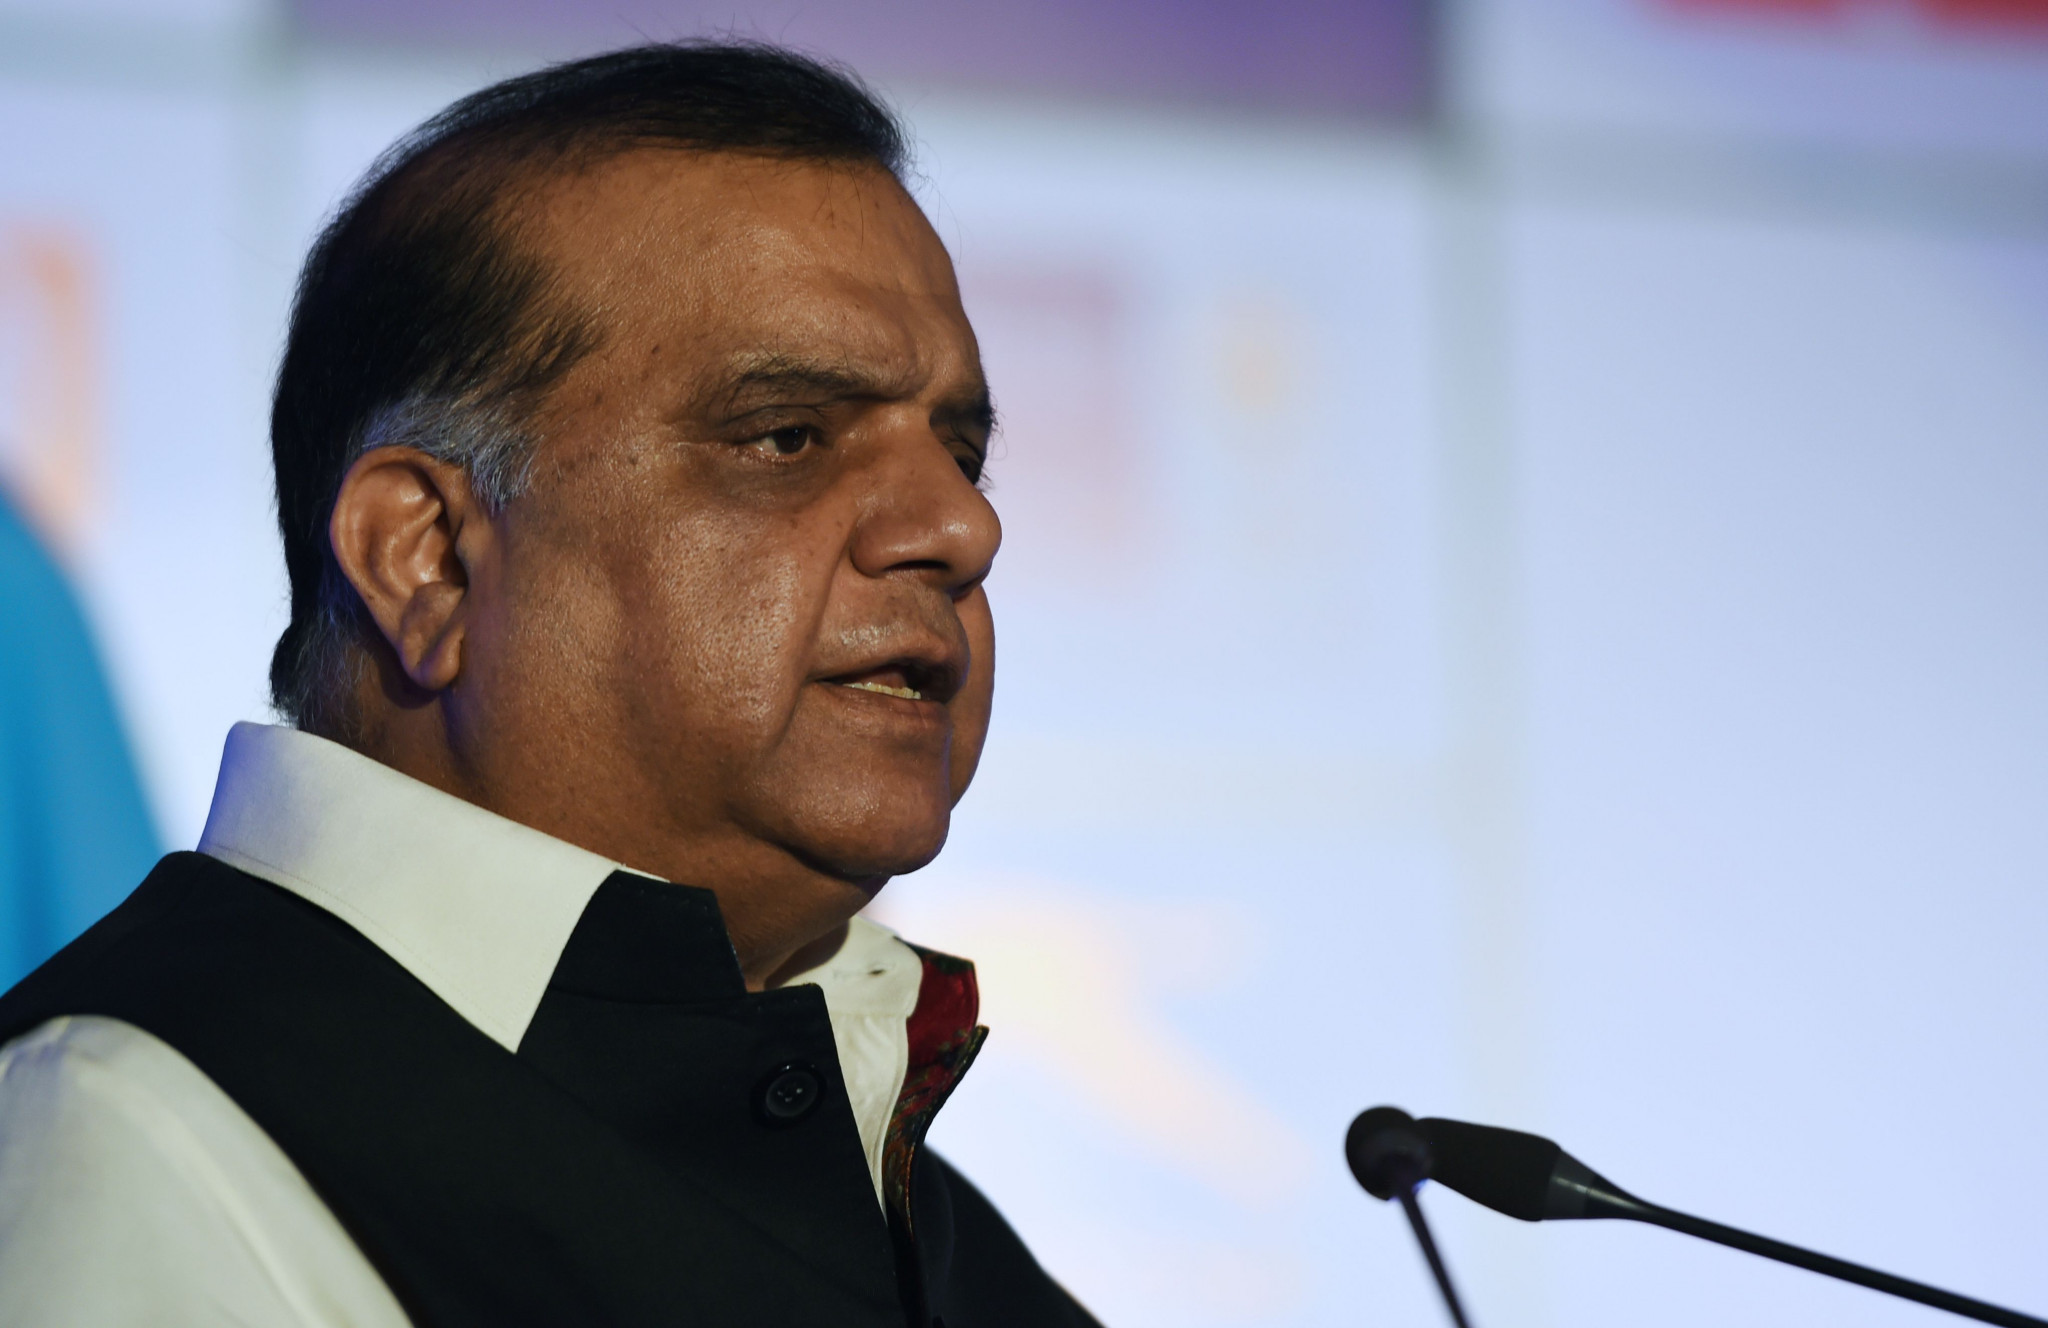 The CGF are set to be hosted by IOA President Narinder Batra, who has talked up a potential boycott ©Getty Images